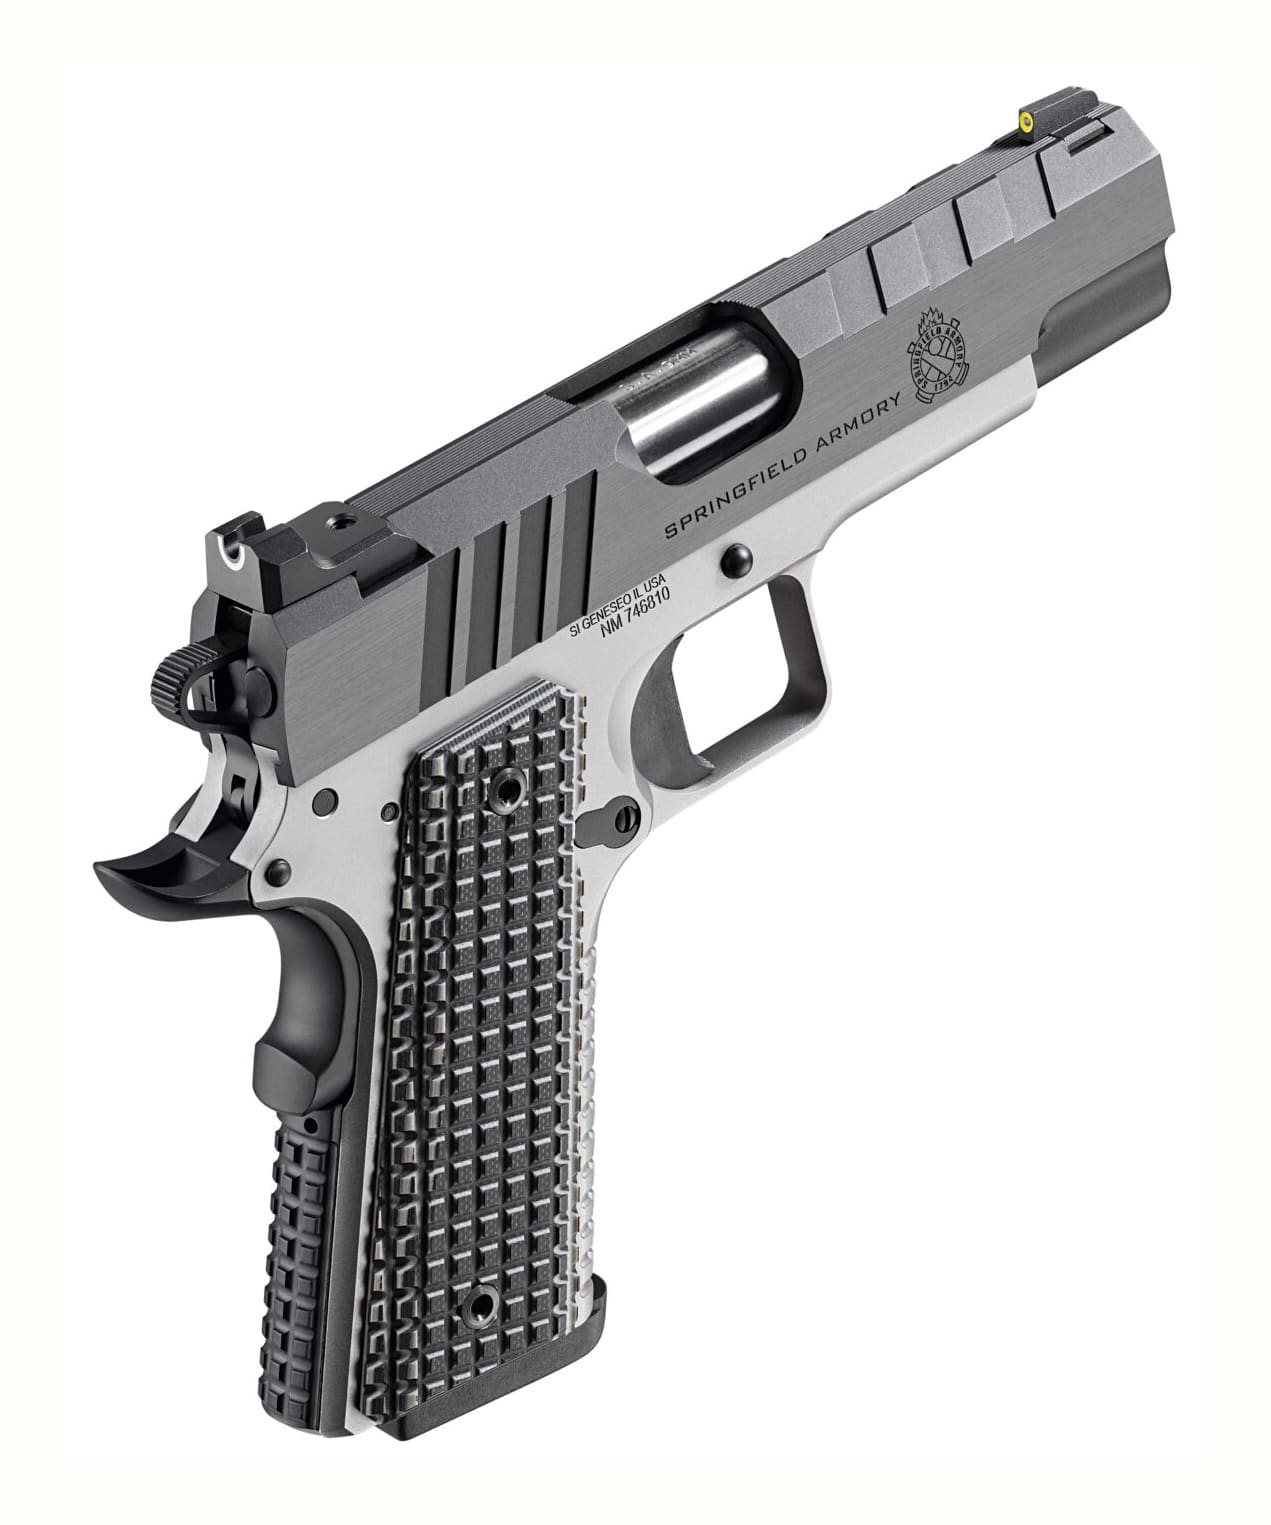 Springfield Armory Emissary 9mm pistol with Tri-Top slide design